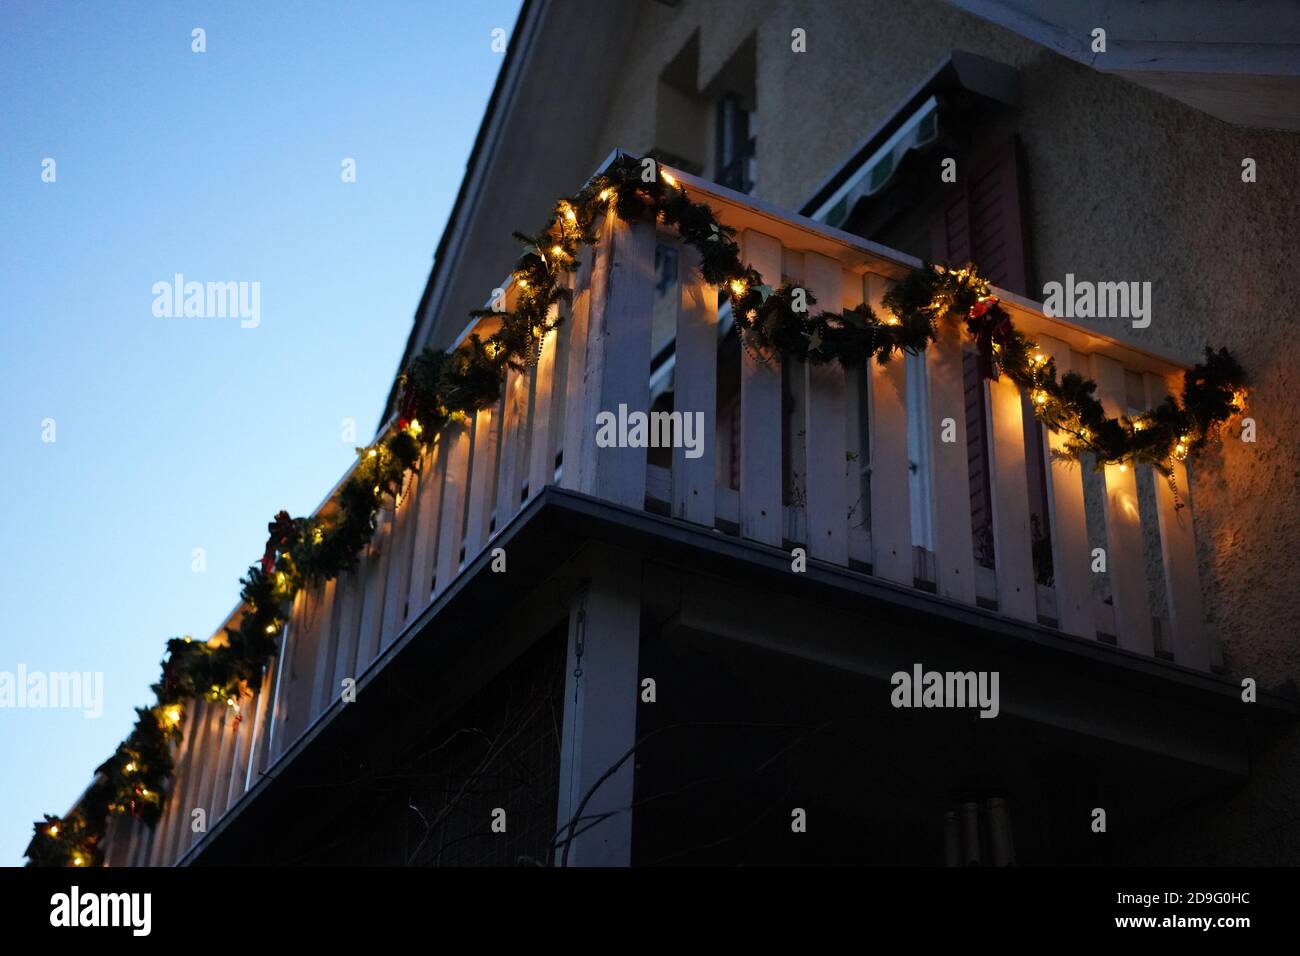 Christmas wreaths with candle lights on wooden balcony in the dusk at Christmastime. Tree at left side with space in the middle. Low angle view. Stock Photo